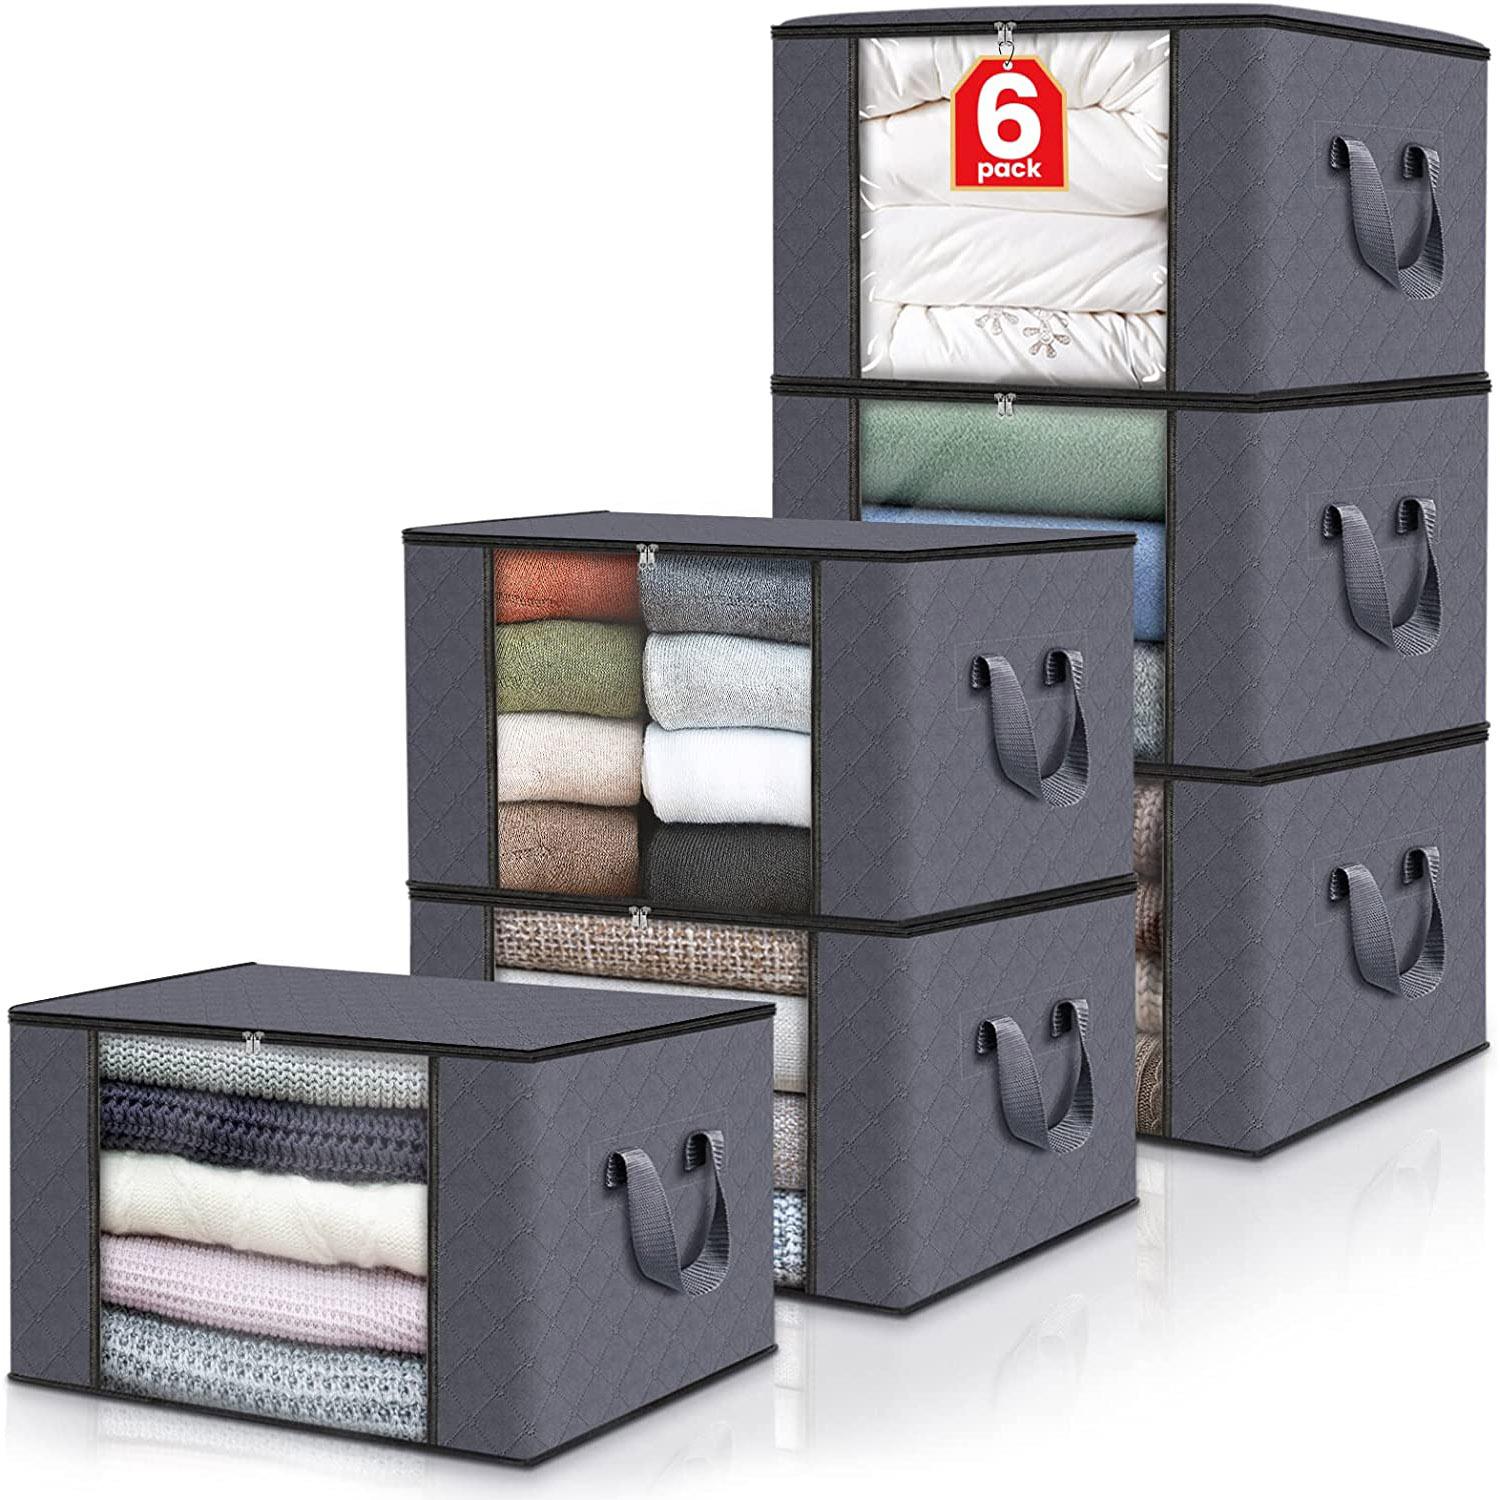 Fab Totes 60L Foldable Storage Bag Container 6 Pack for $14.99 Shipped